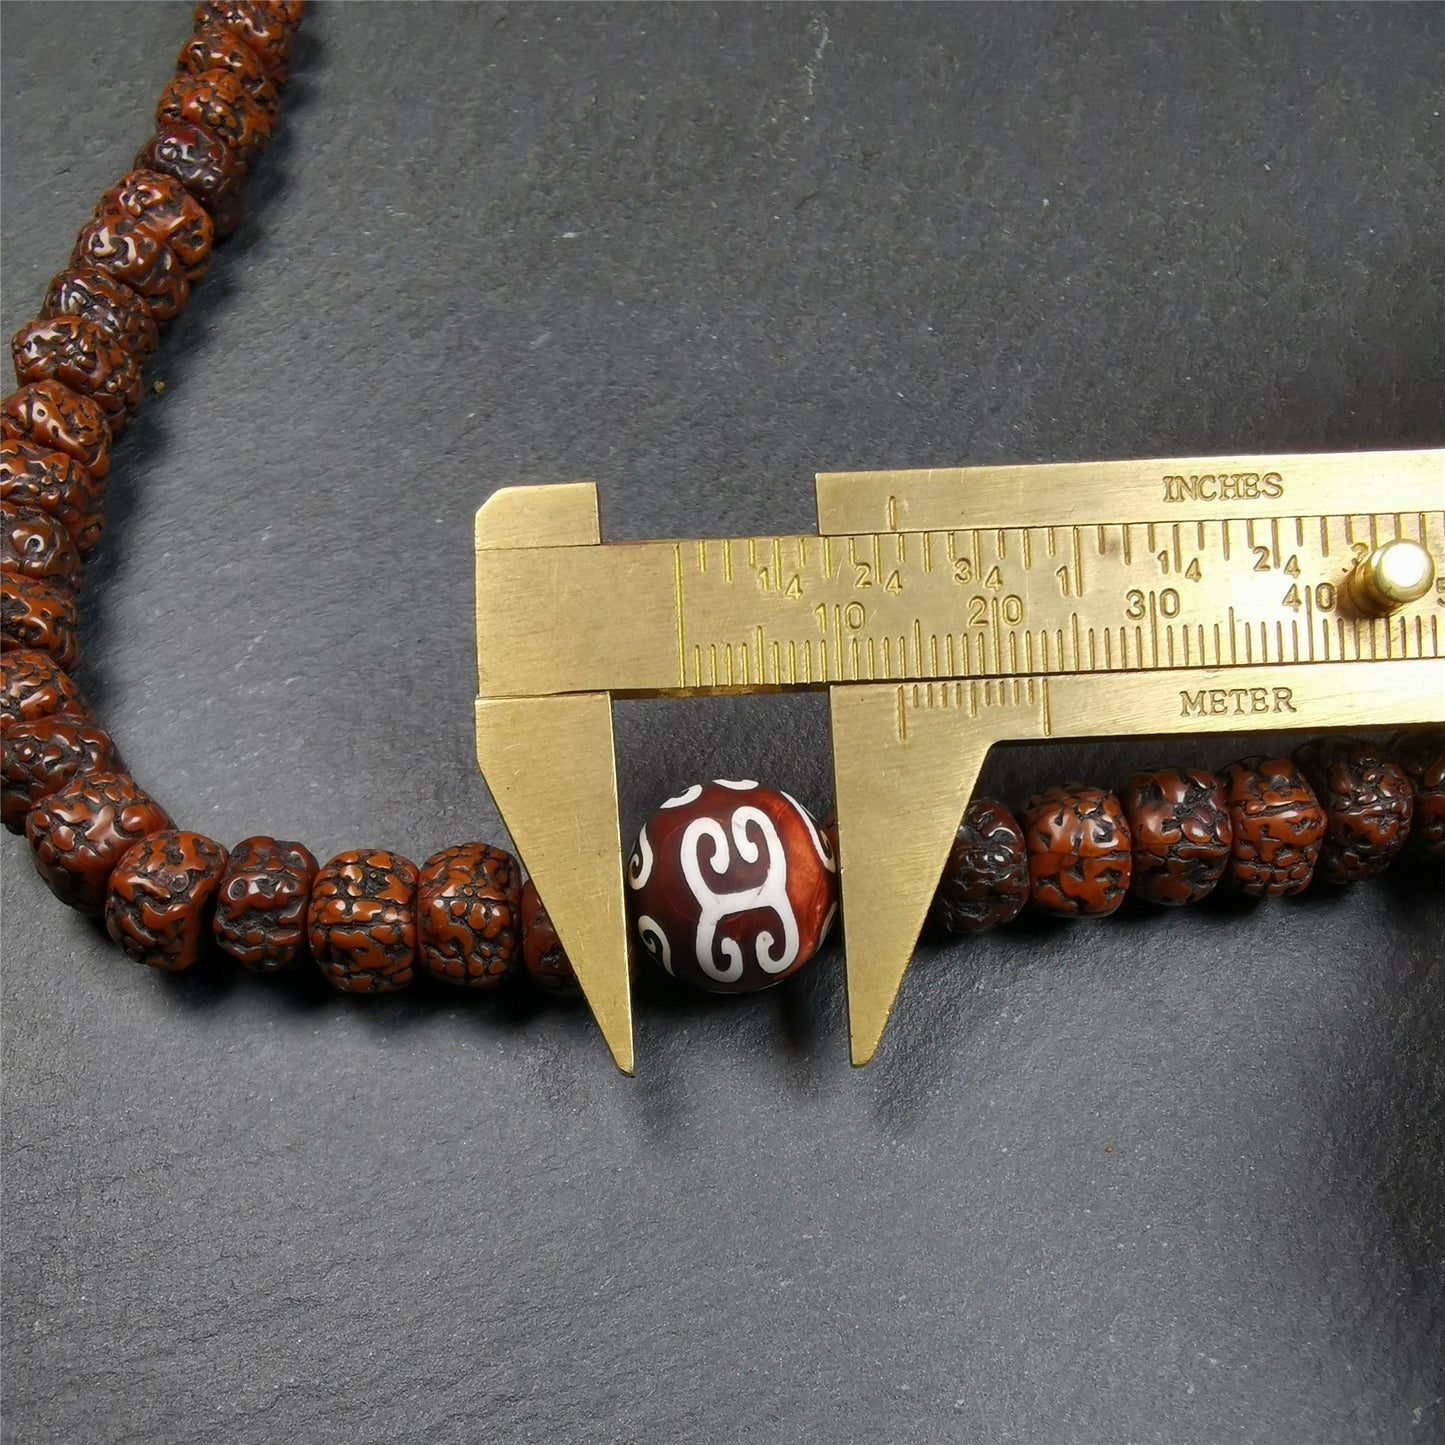 This old mala was handmade from tibetan crafts man in Baiyu County,blessed in Baiyu monastery. It's composed of 108 pcs 9mm rudraksha beads,with 3 cloud patter dzi beads,bead diameter is 0.35 inch and circumference is 30 inches.